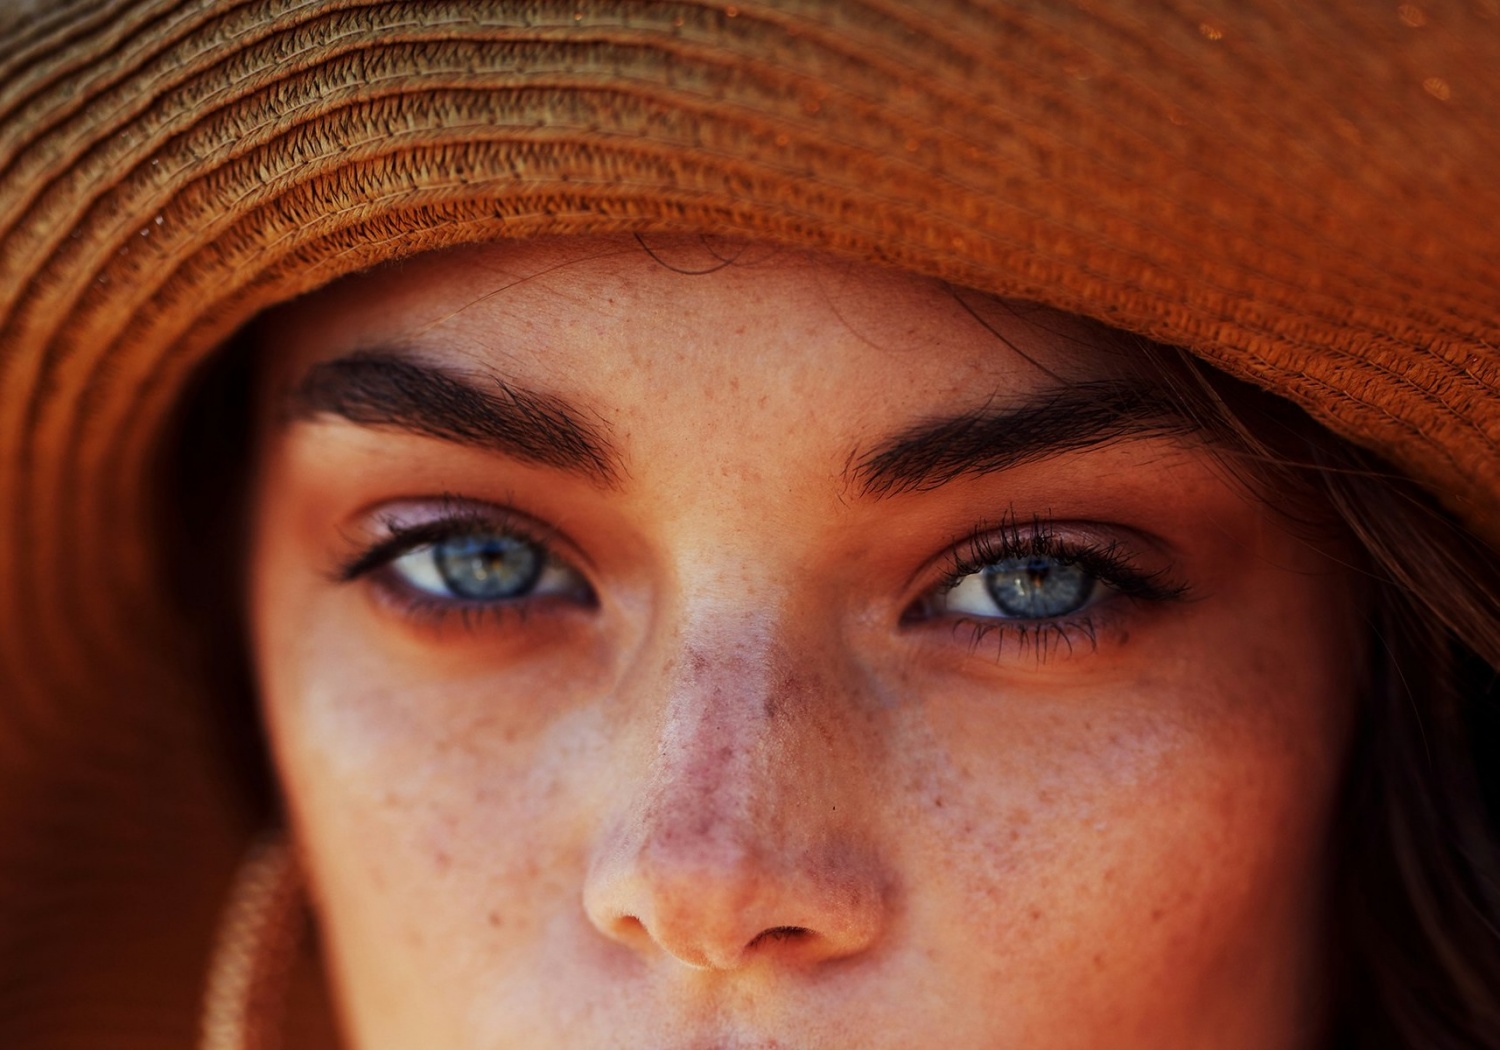 girl with blue eyes